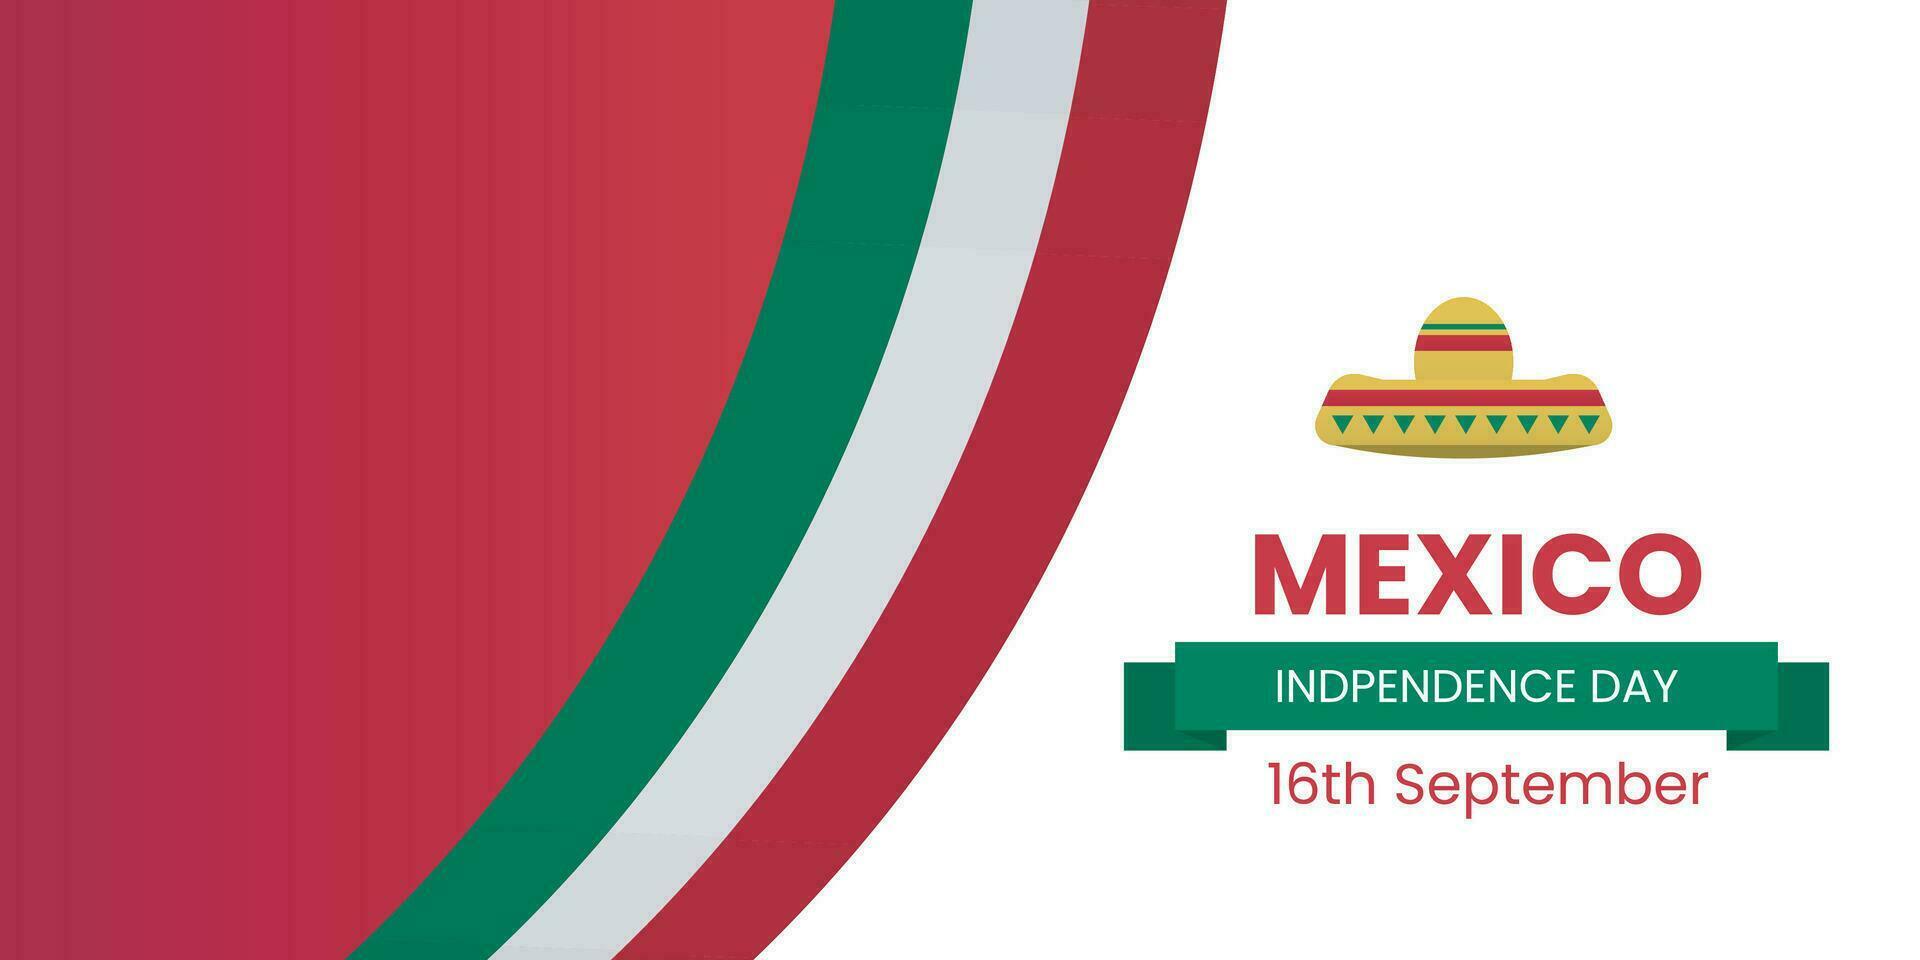 Mexico Independence Day Banner or Post Template with Flags. Happy Independence Day Mexico 16th September. vector